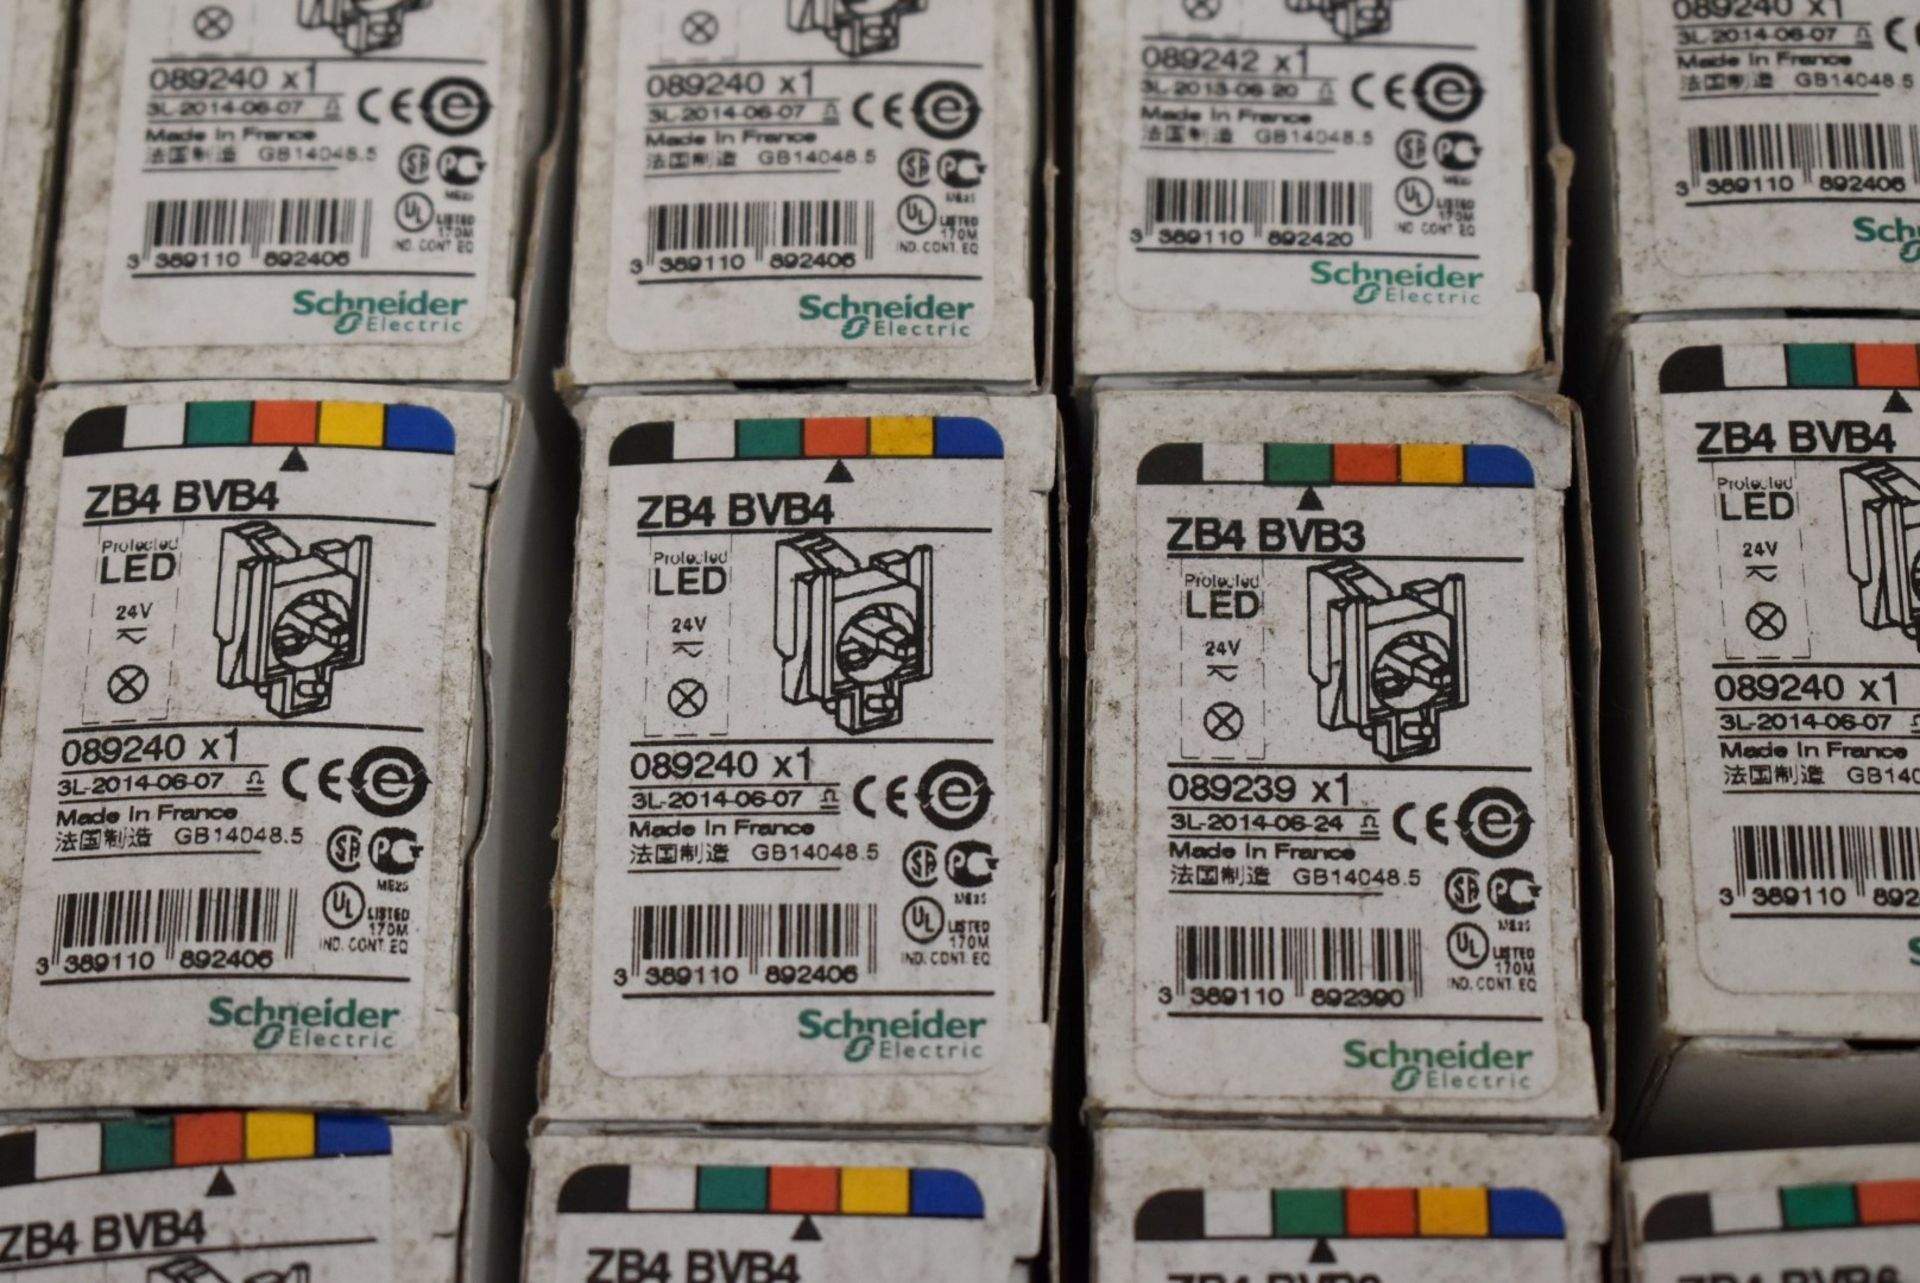 45 x Schneider Electric Harmony XB4 Light Blocks - New Boxed Stock - RRP £585 - Types Include: ZBA - Image 8 of 8